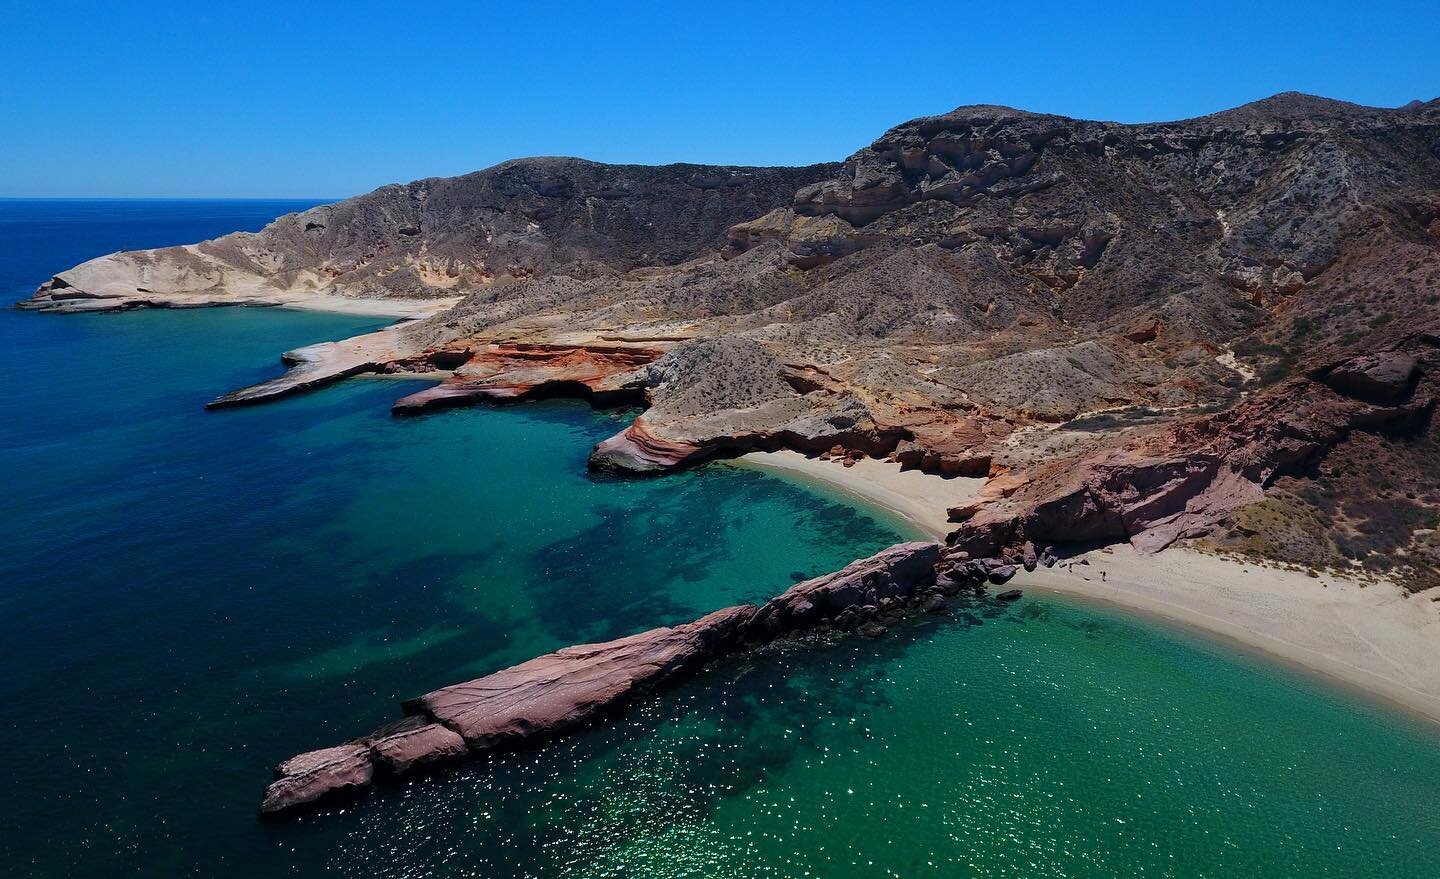 The Spanish term aislamiento is something I have been reflecting on regarding the production of &quot;islandness&quot; on the Baja California peninsula. Aislamiento translates as &quot;isolation&quot; but literally means something along the lines of 